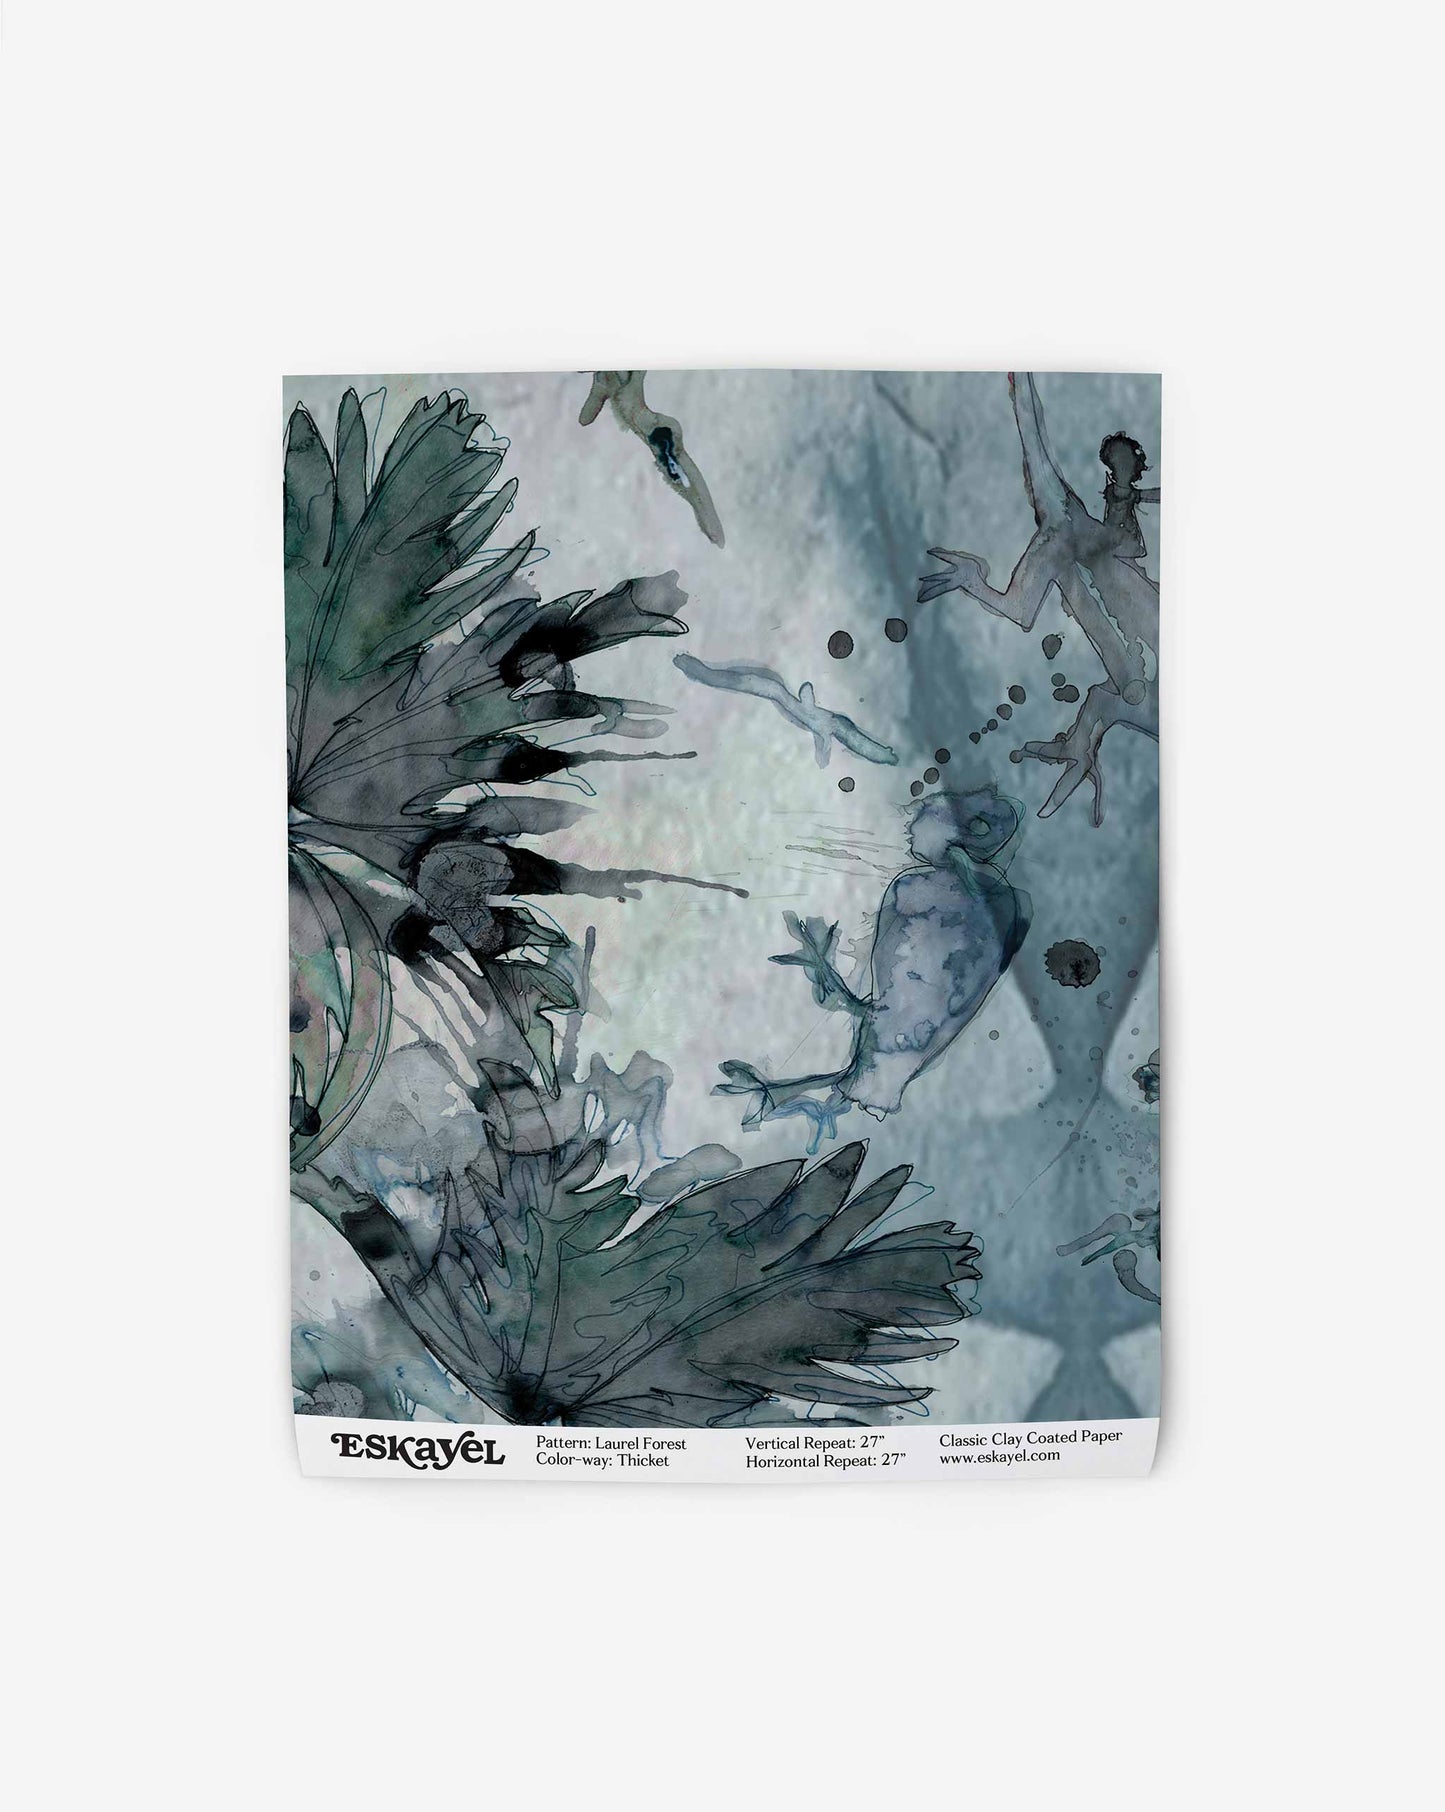 Abstract Laurel Forest Wallpaper||Thicket featuring shades of blue and gray with botanical and splatter elements, displayed on a white background with text annotations at the bottom, evoking a tropical atmosphere.